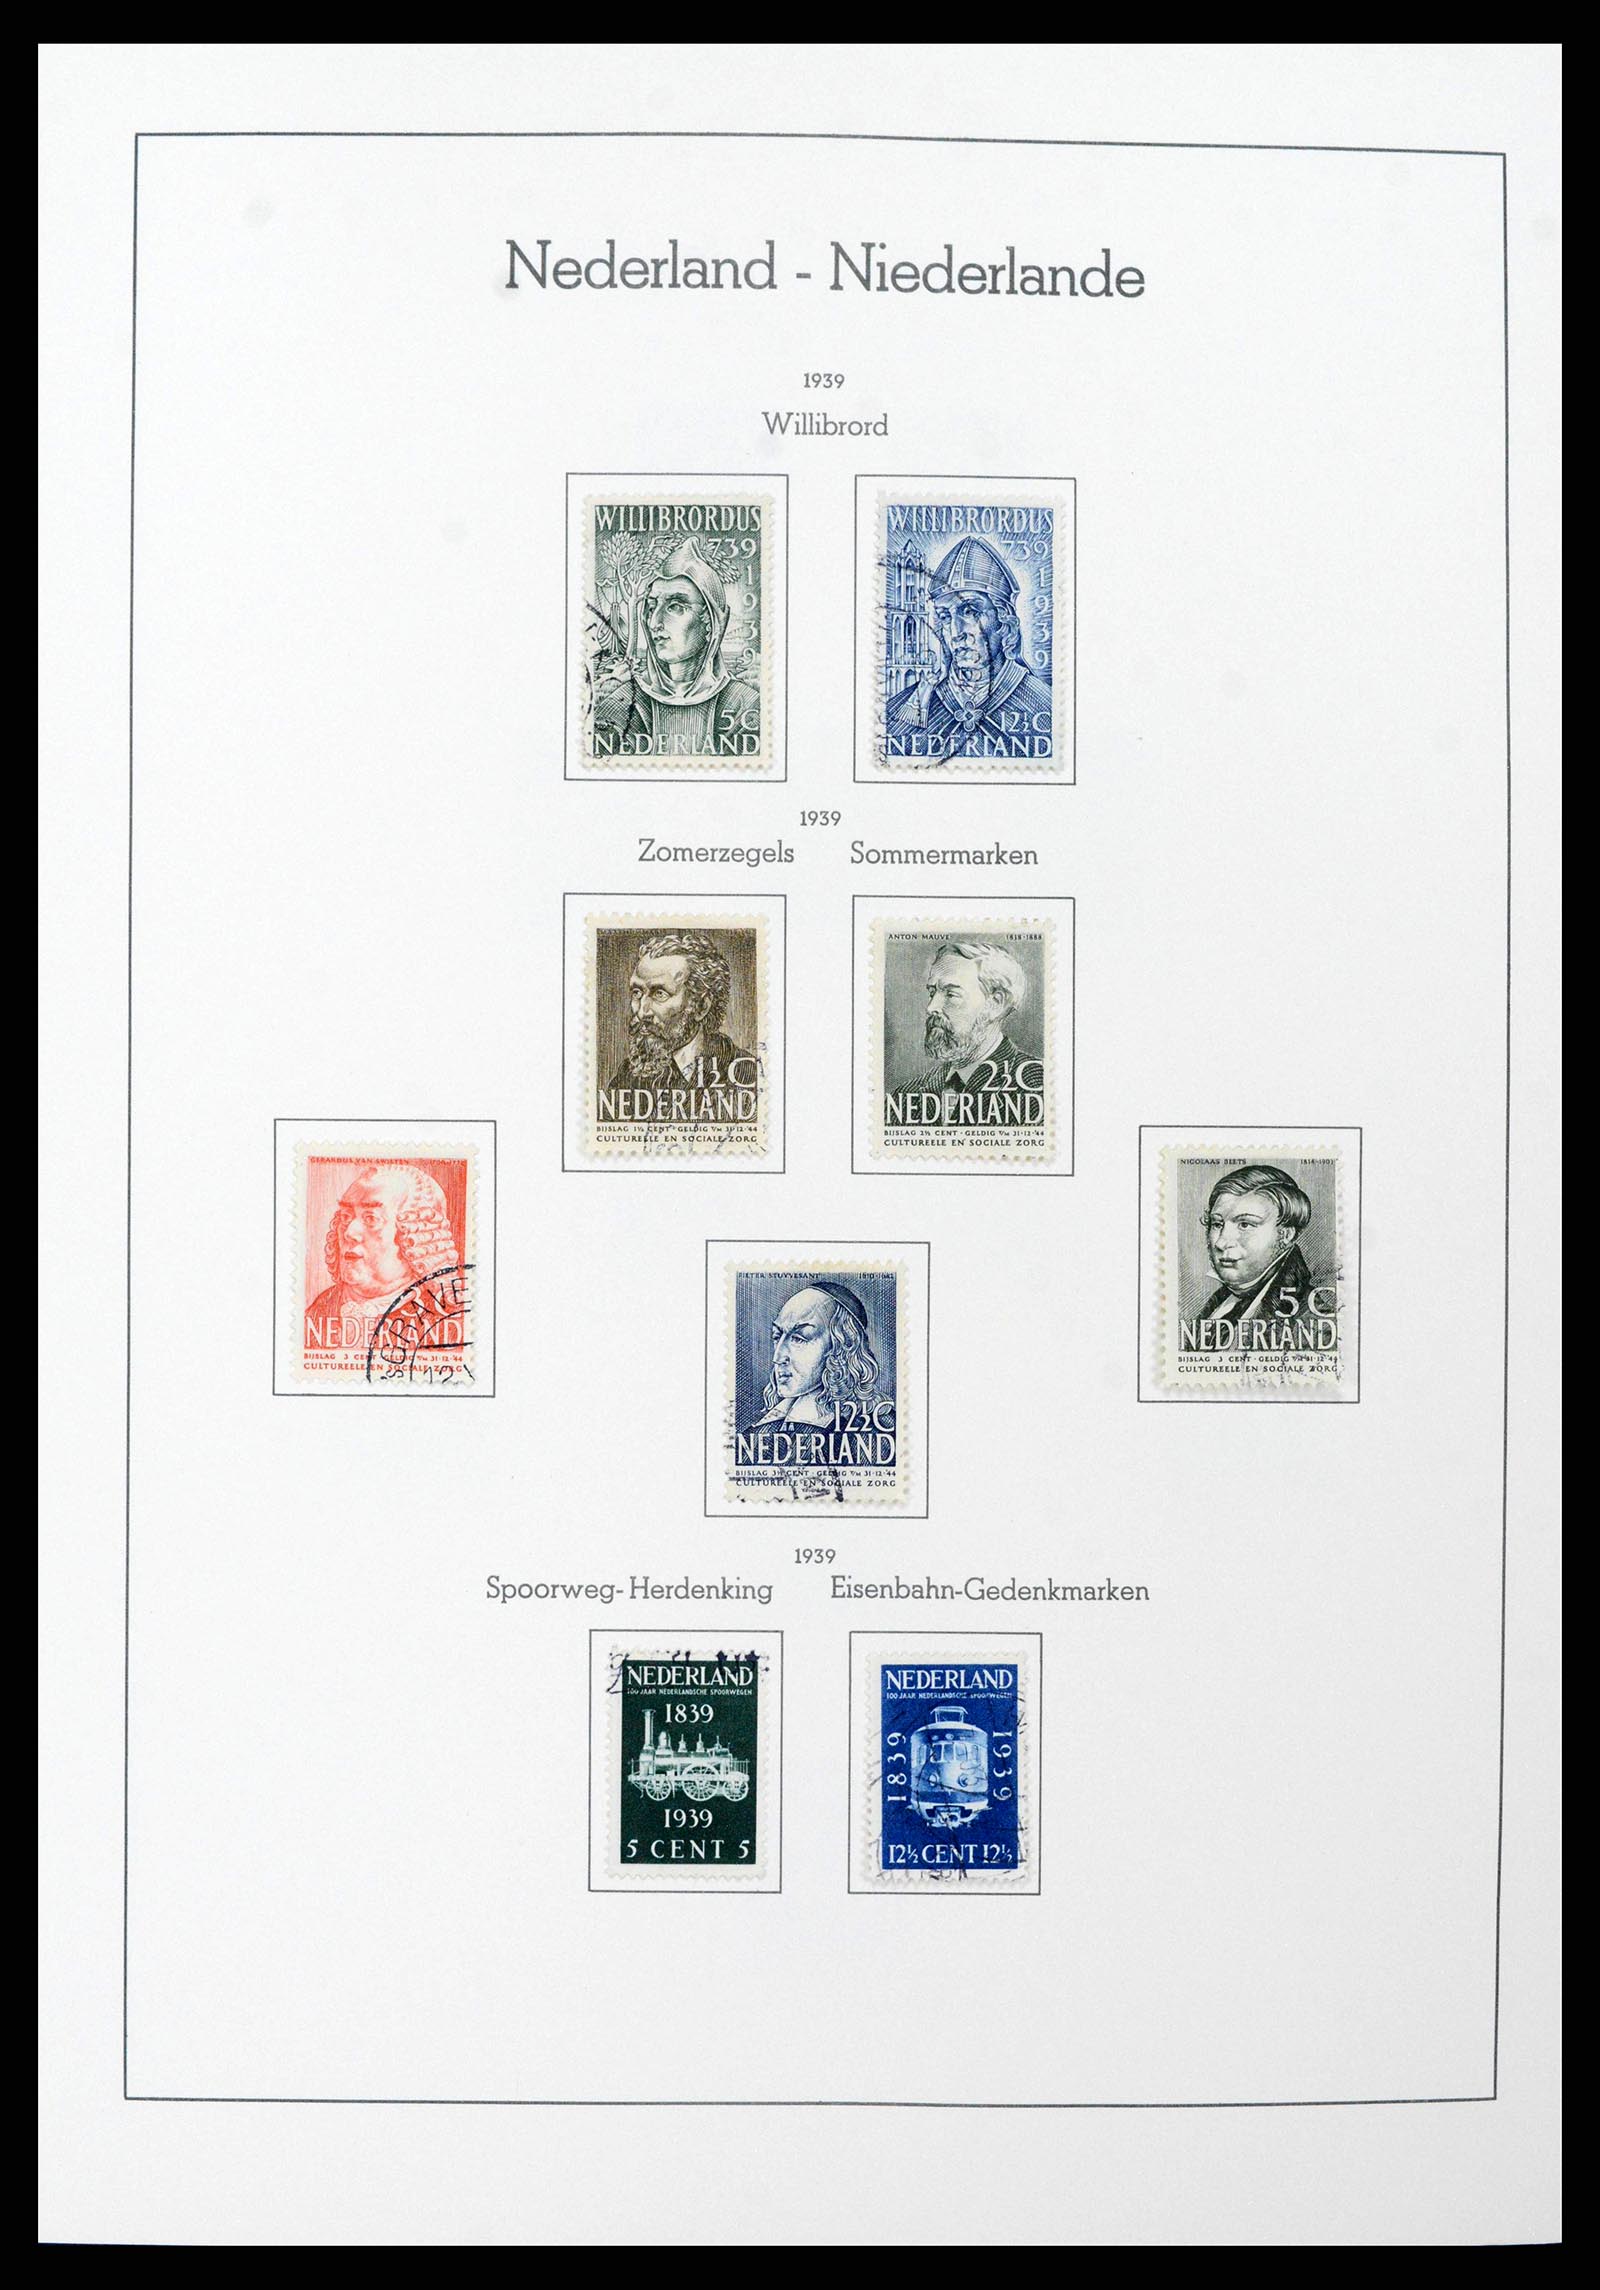 38841 0025 - Stamp collection 38841 Netherlands 1852-1986.